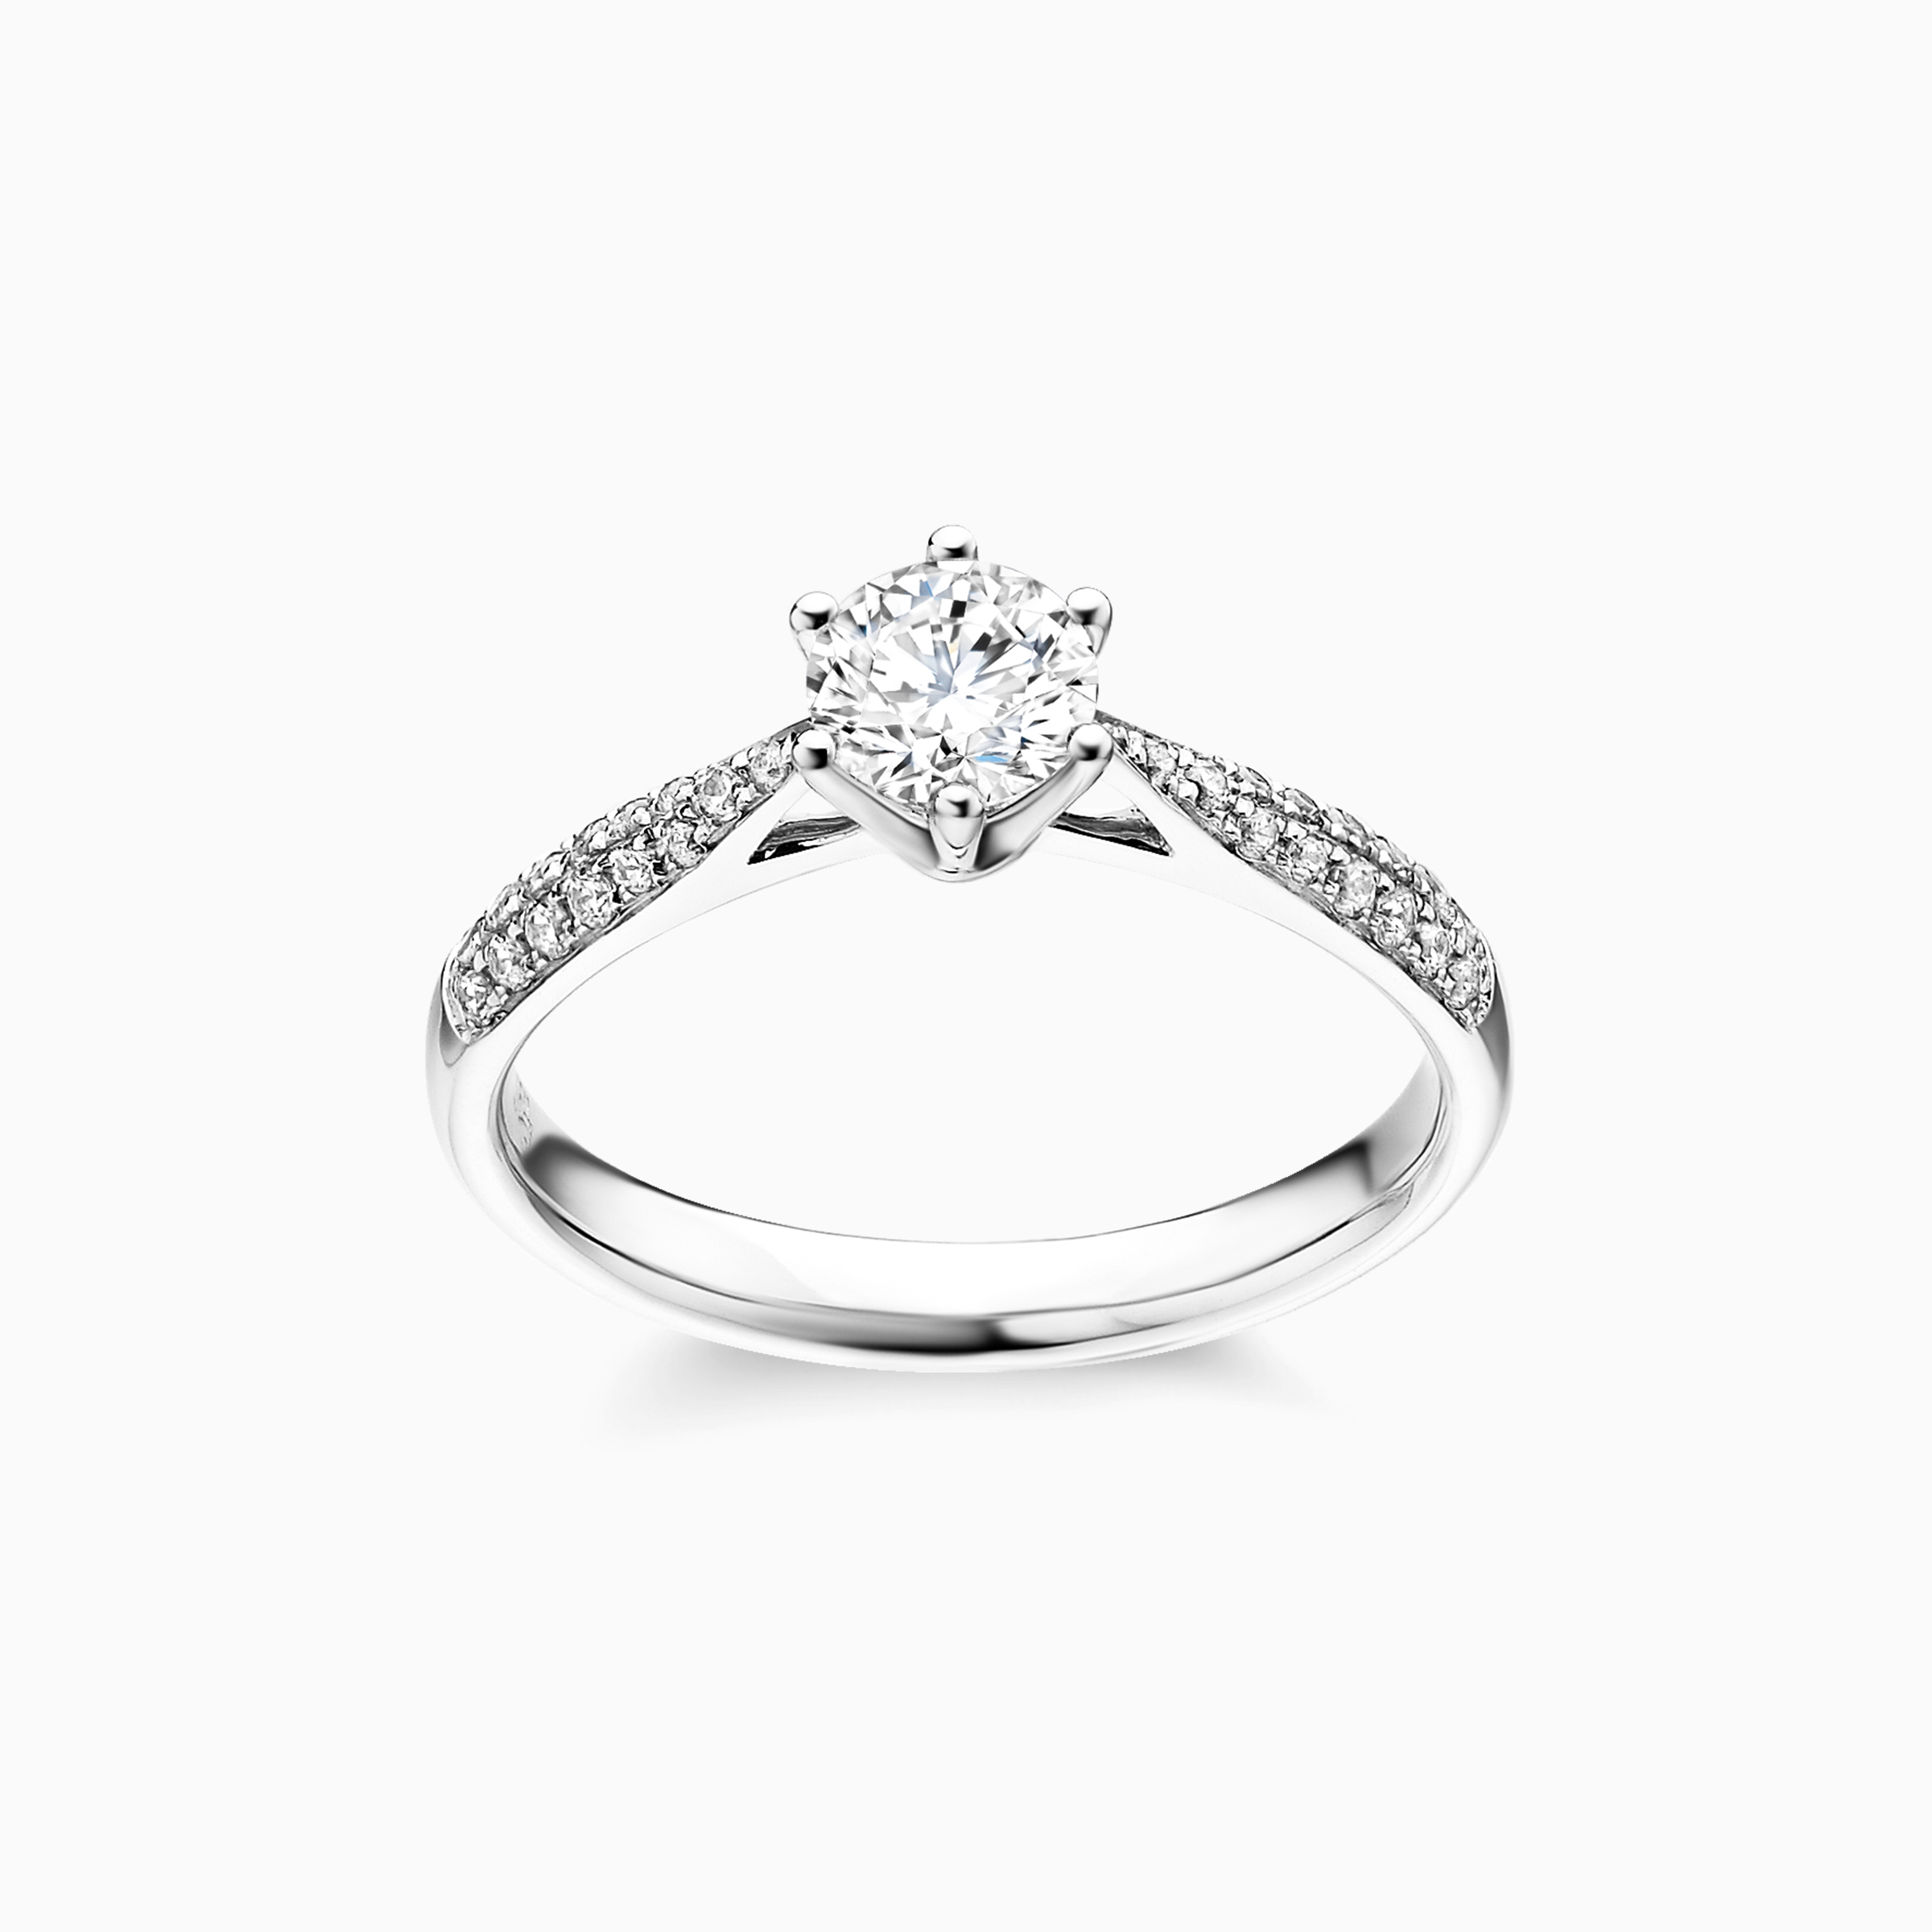 Darry Ring diamond band engagement ring in platinum